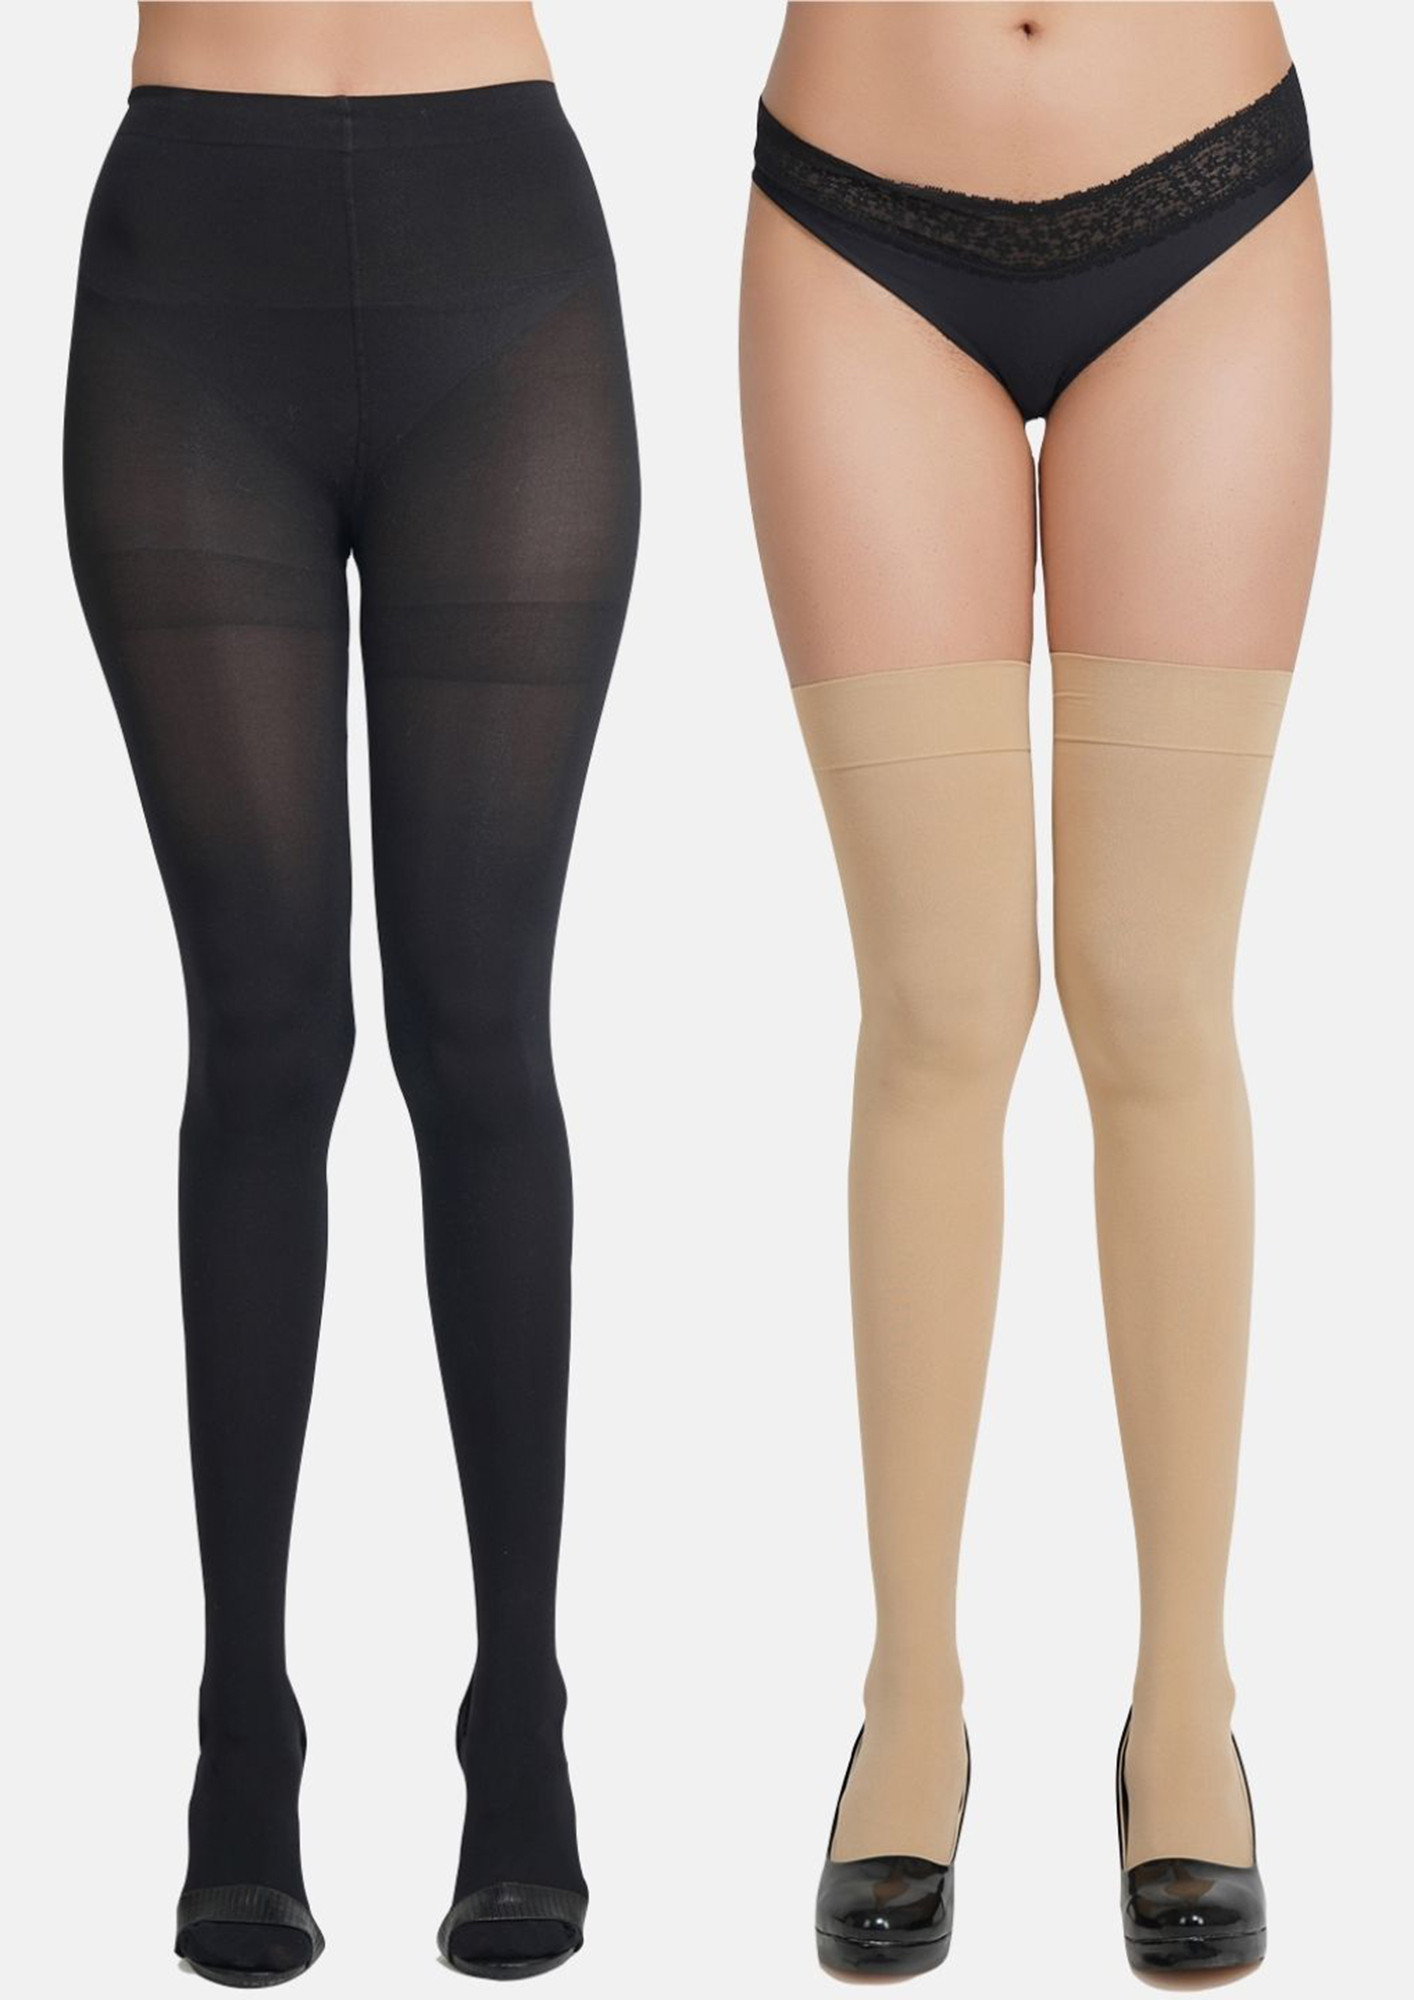 Opaque Stockings - Buy Opaque Stockings online in India